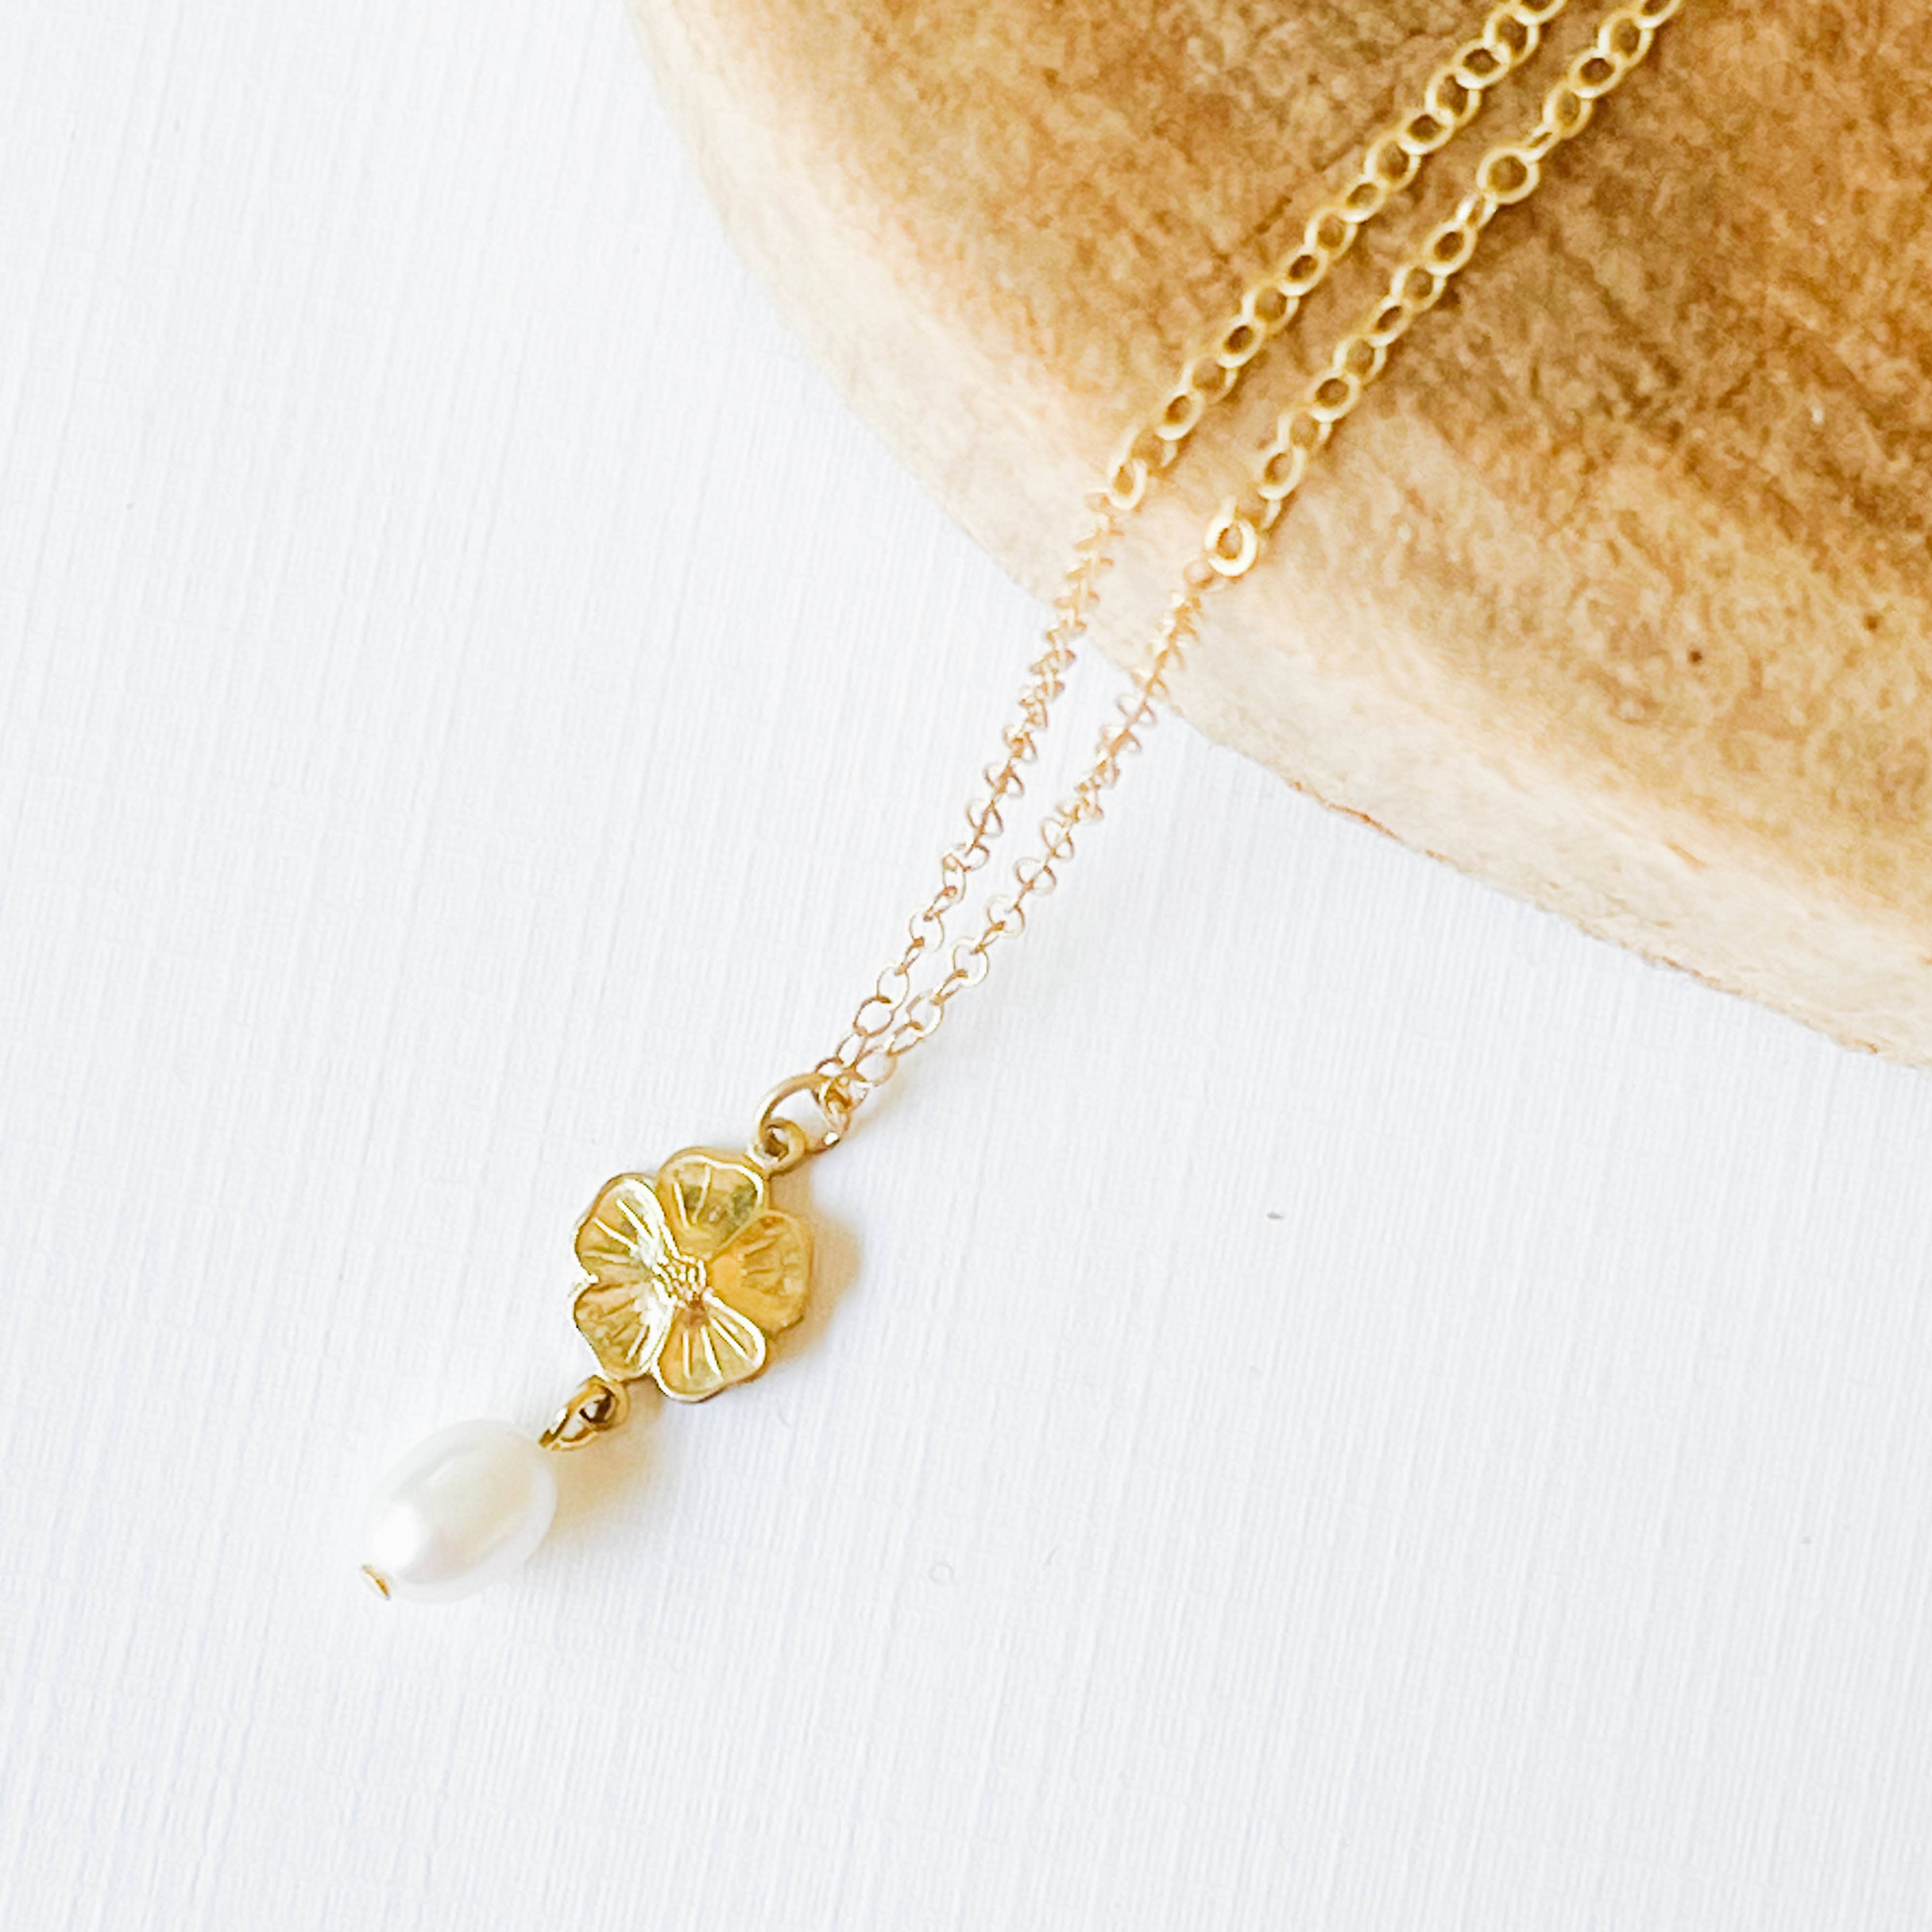 Nest Pretty Things - Gold Flower and Pearl necklace